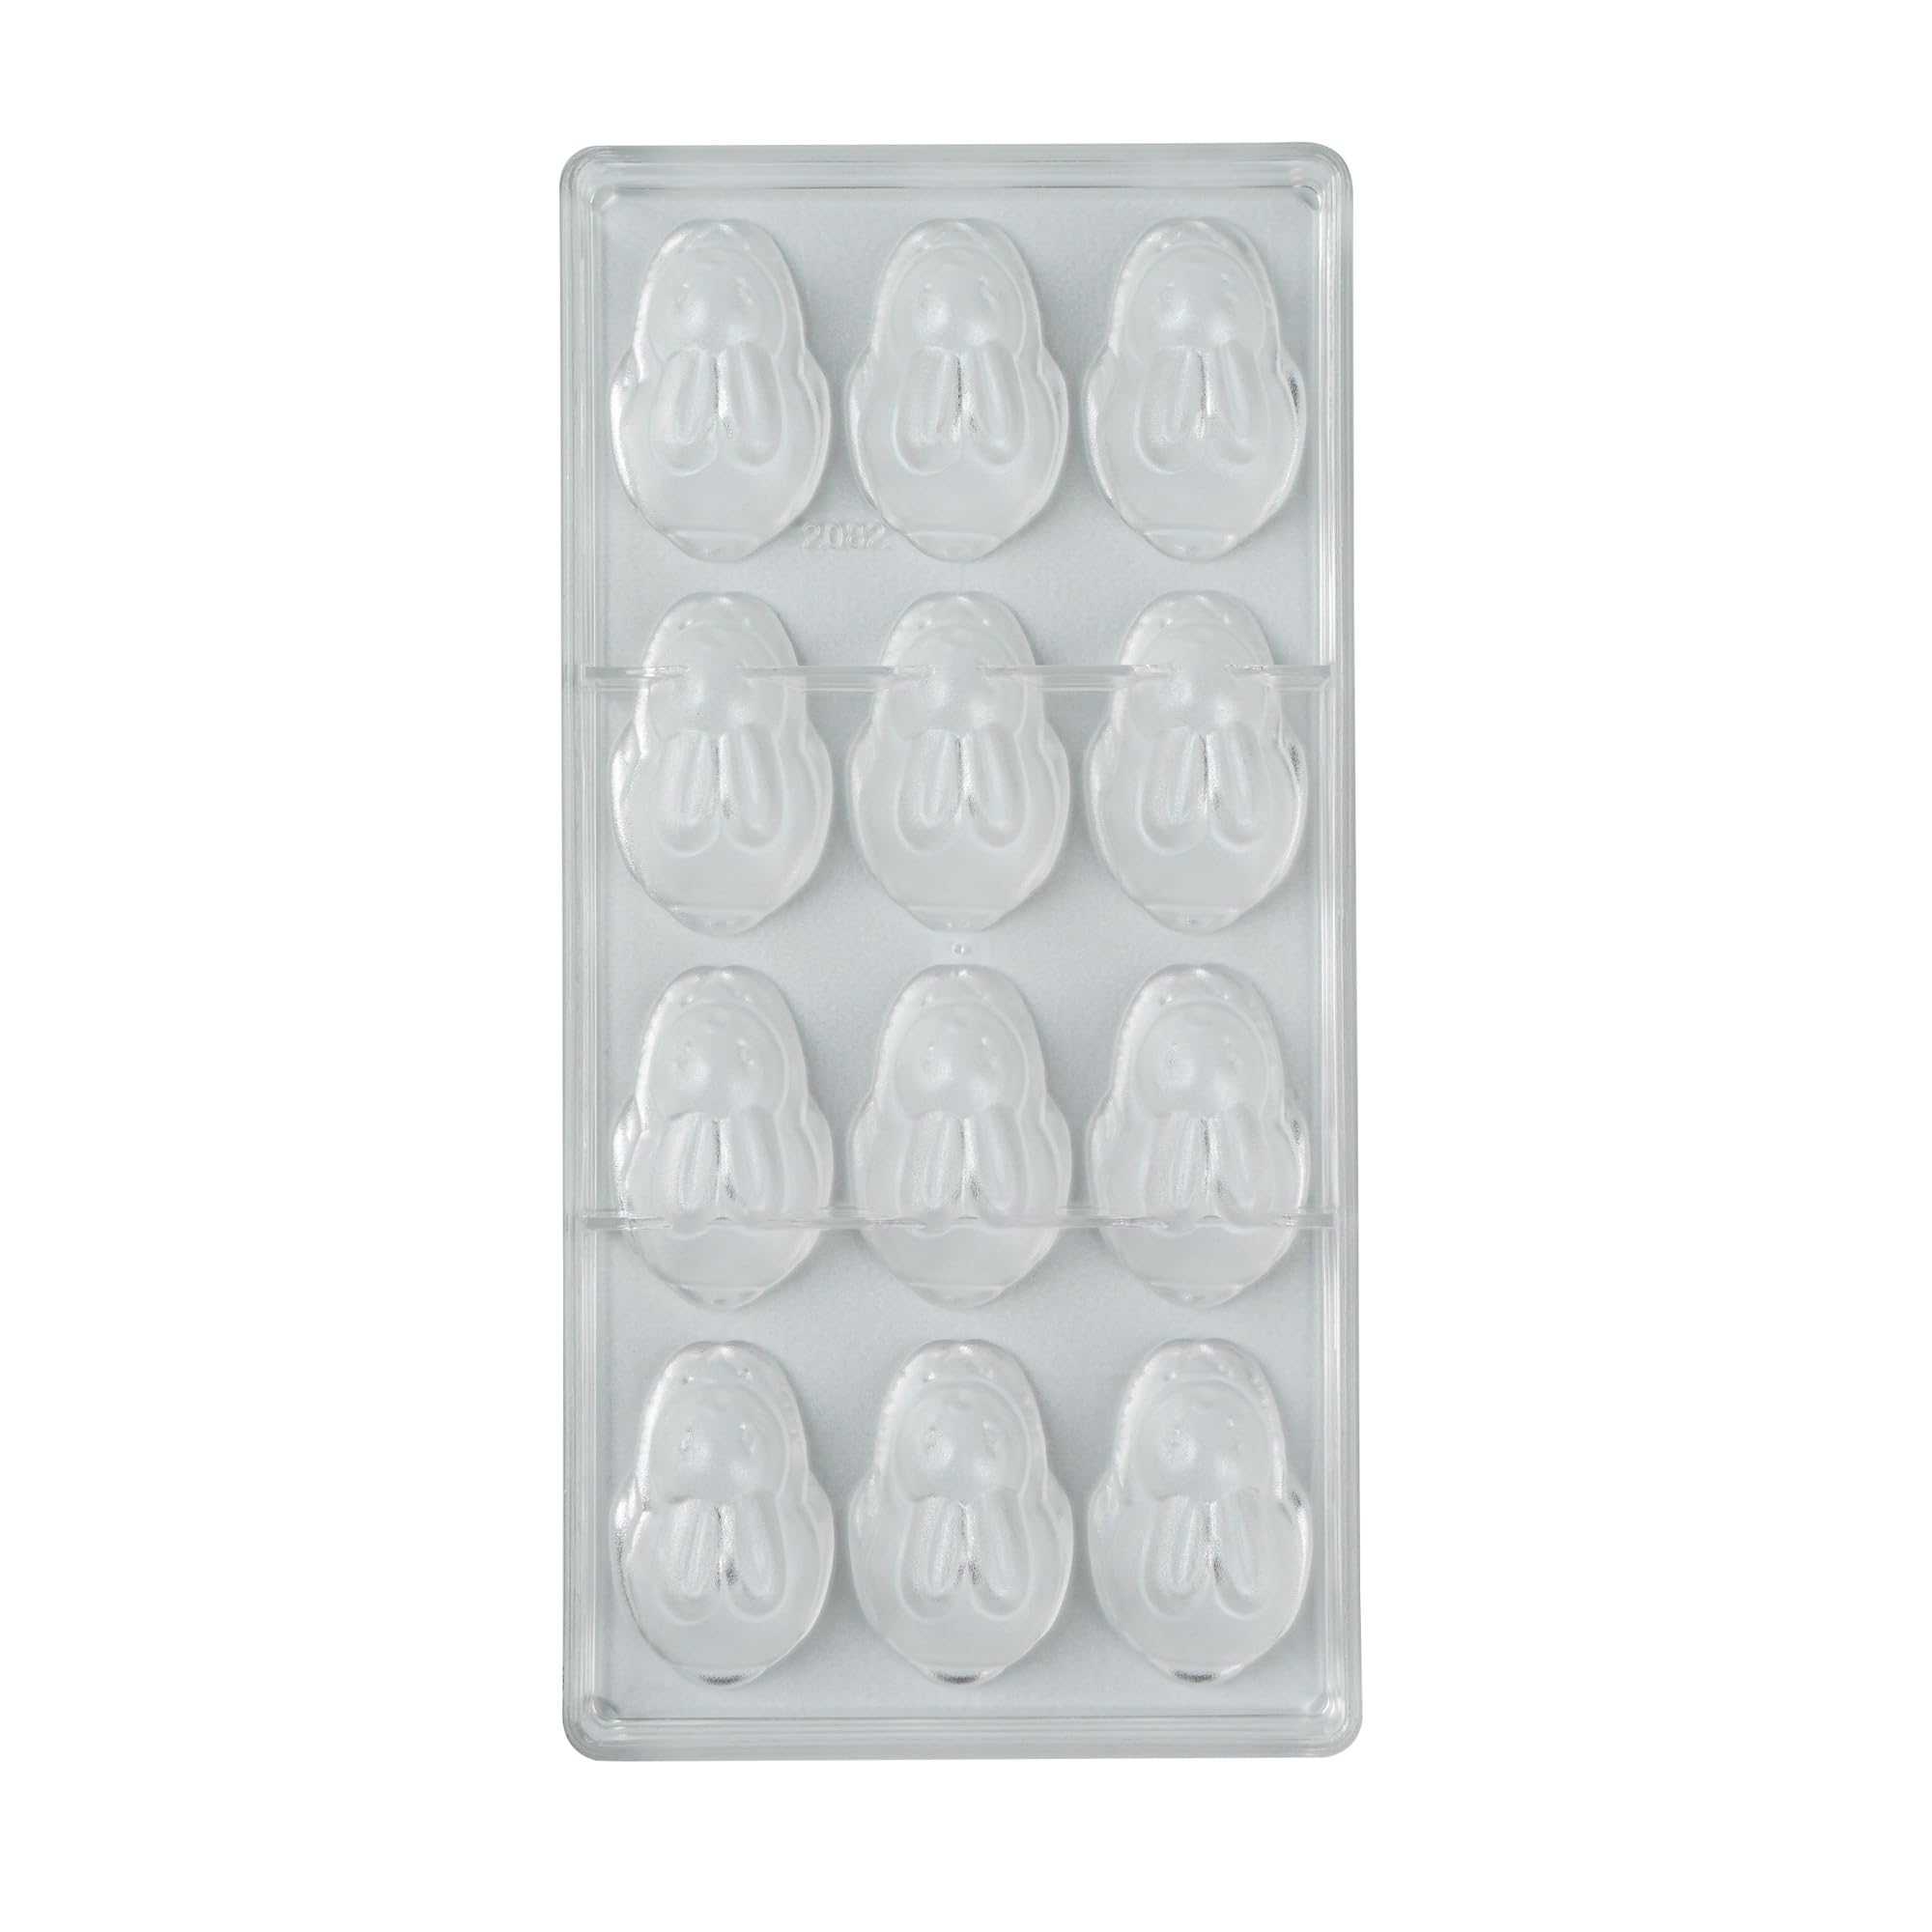 Pastry Tek 10.8 x 5.3 Inch Chocolate Shaping Molds, 10 Freezable Bunny Shaped Candy Molds - 12 Cavities, Dishwashable, Clear Polycarbonate Chocolate Molds, Easy To Release - Restaurantware